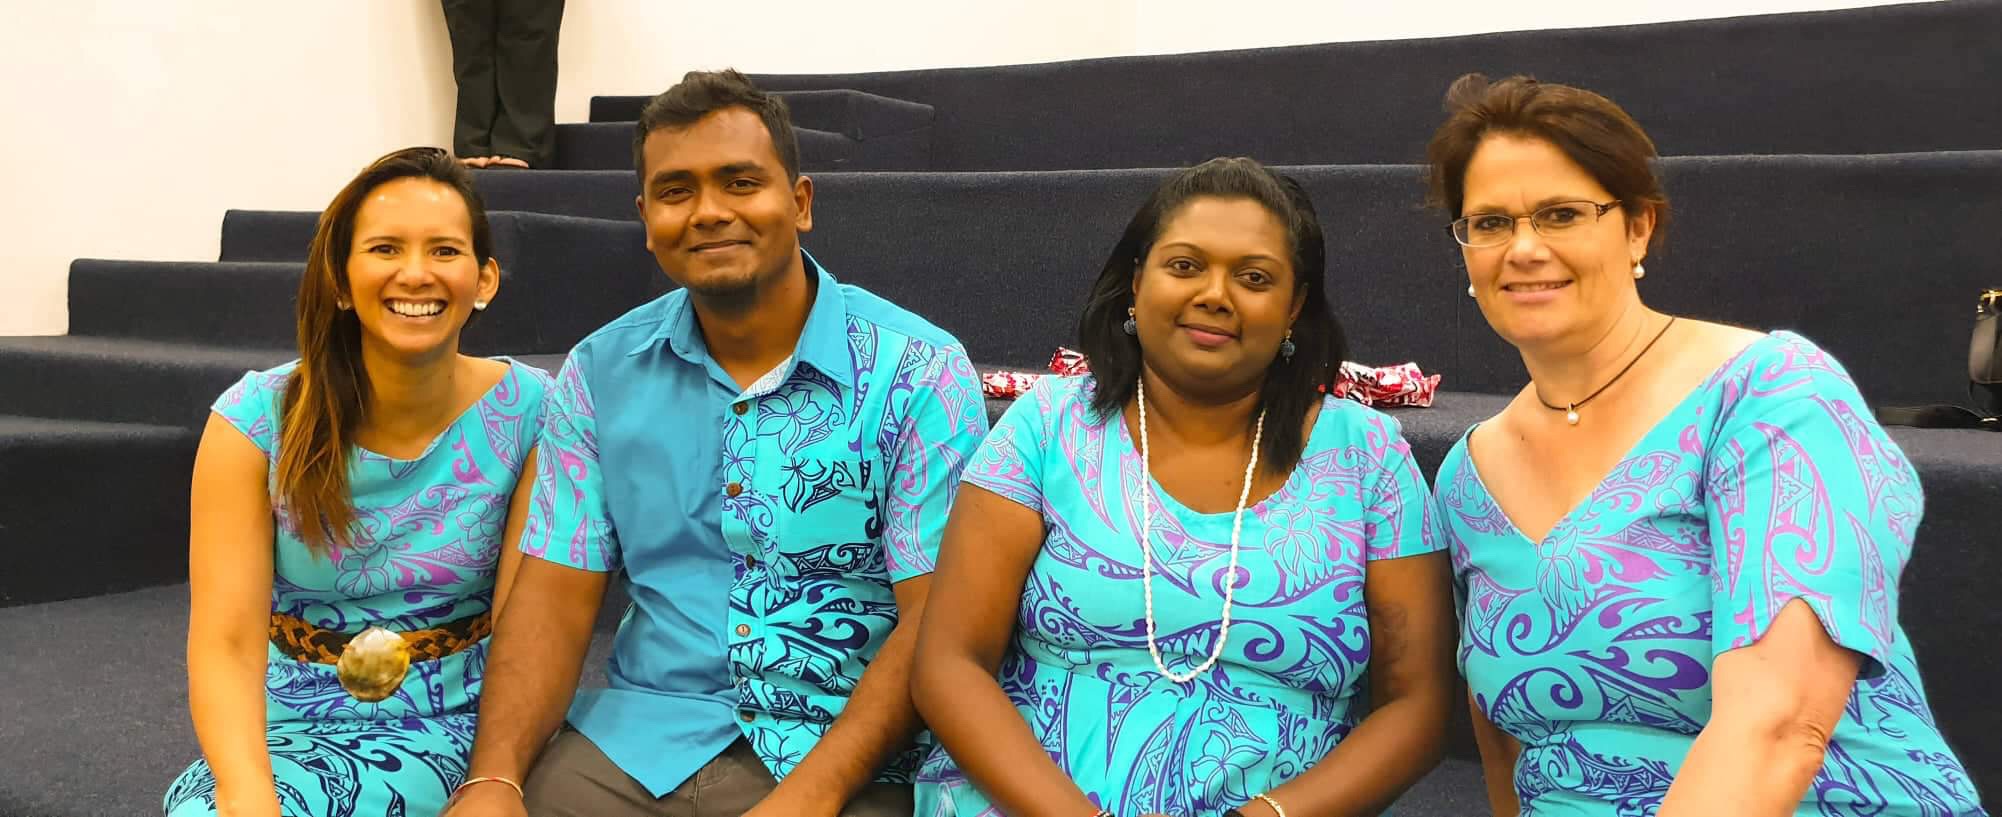 featured image for UMaine Speech Therapy Telepractice Program providing telepractice services at the International School Suva (ISS), Fiji featured in ASHA Perspectives Special Interest Group